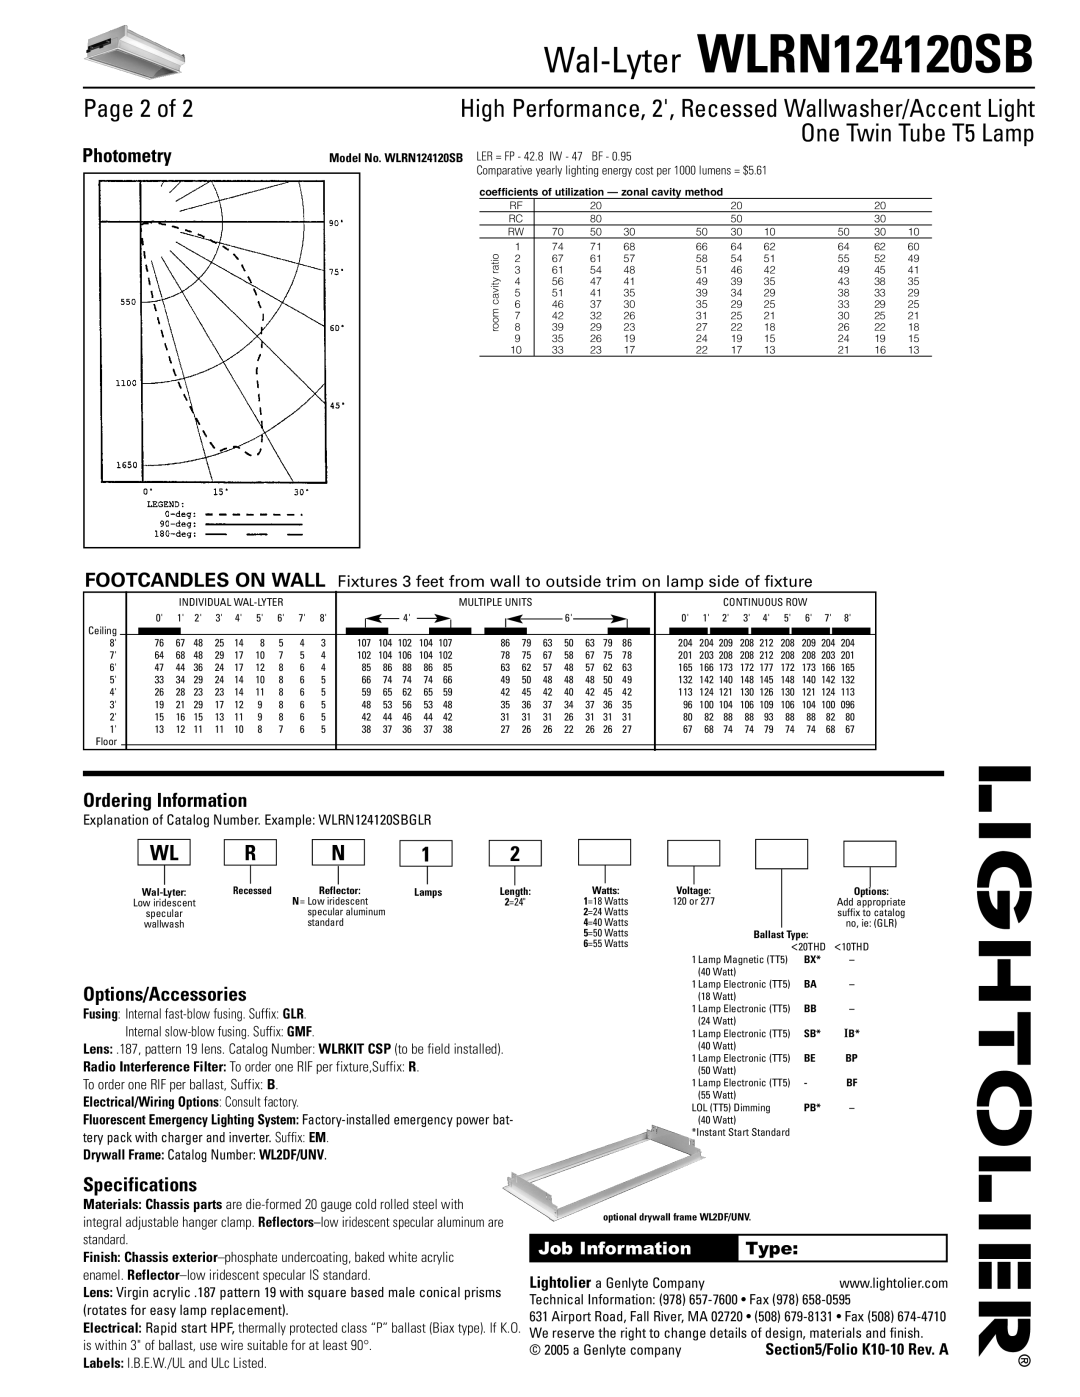 Lightolier WLRN124120SB Page 2 of, One Twin Tube T5 Lamp, Photometry, Ordering Information, Options/Accessories, Type 